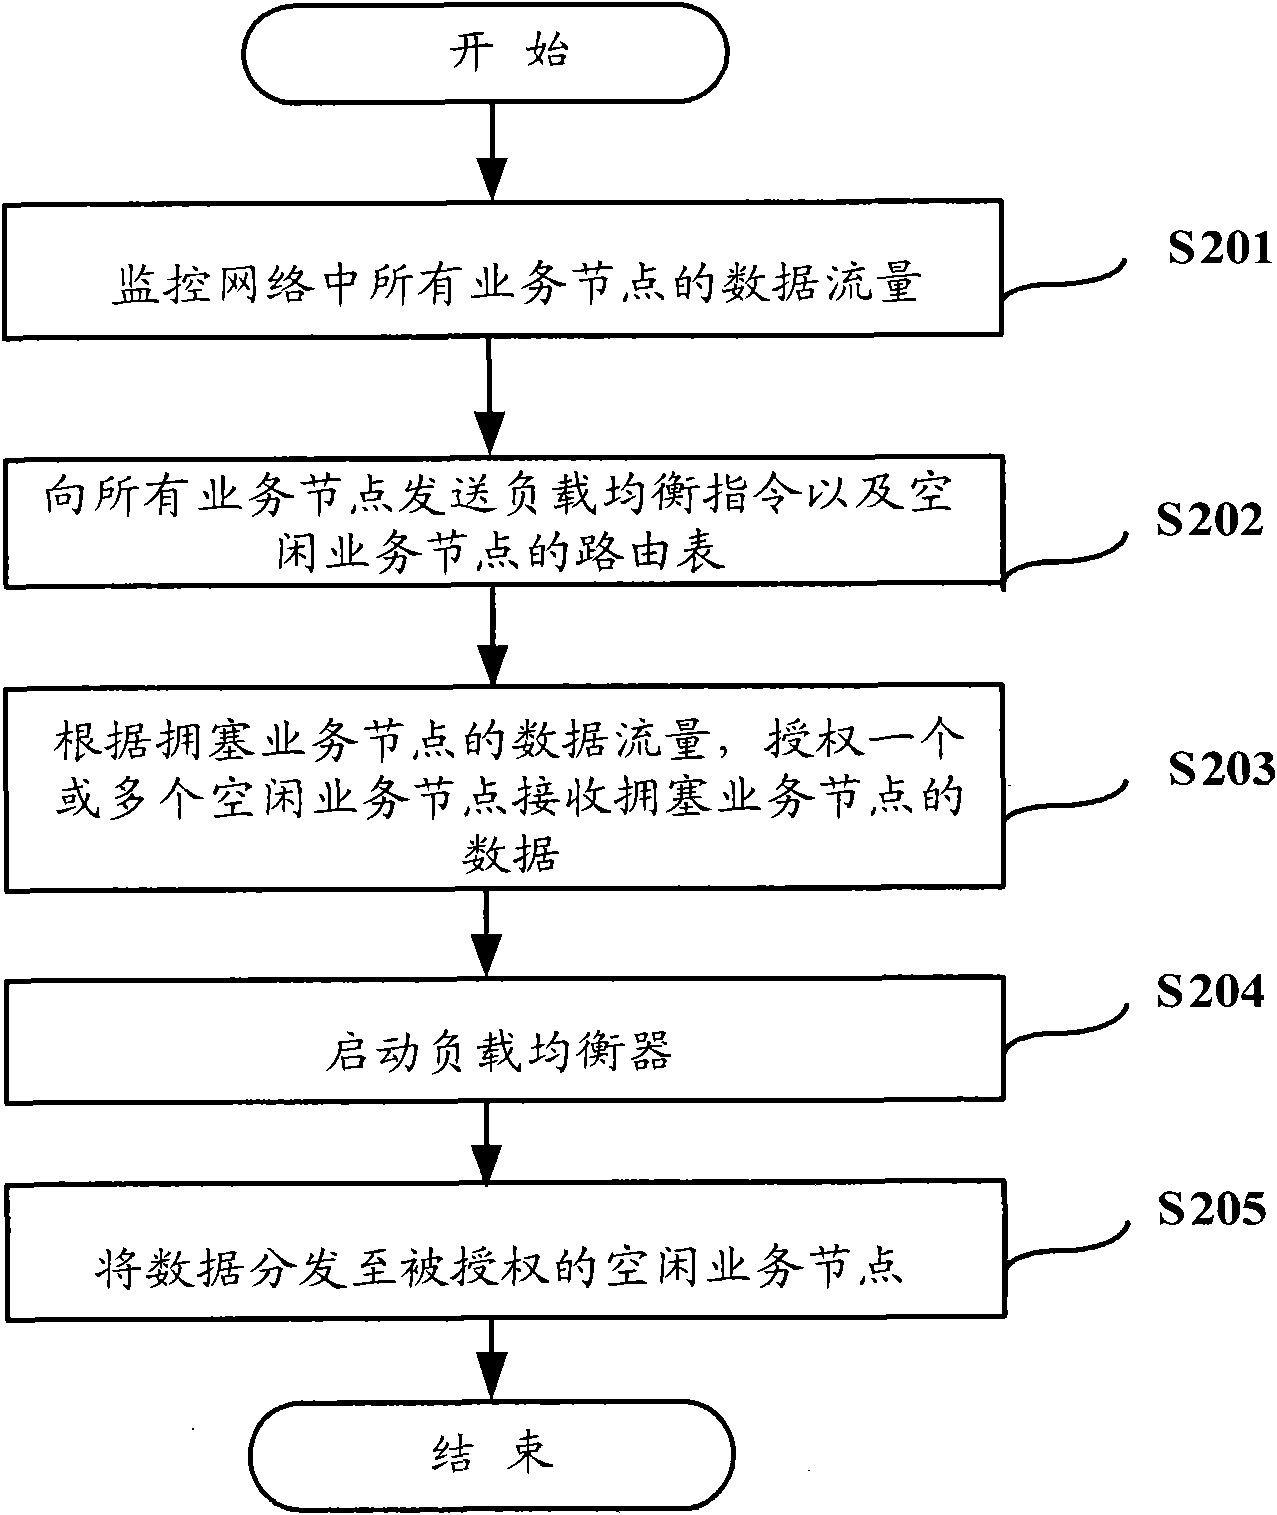 Network congestion control method, device and system